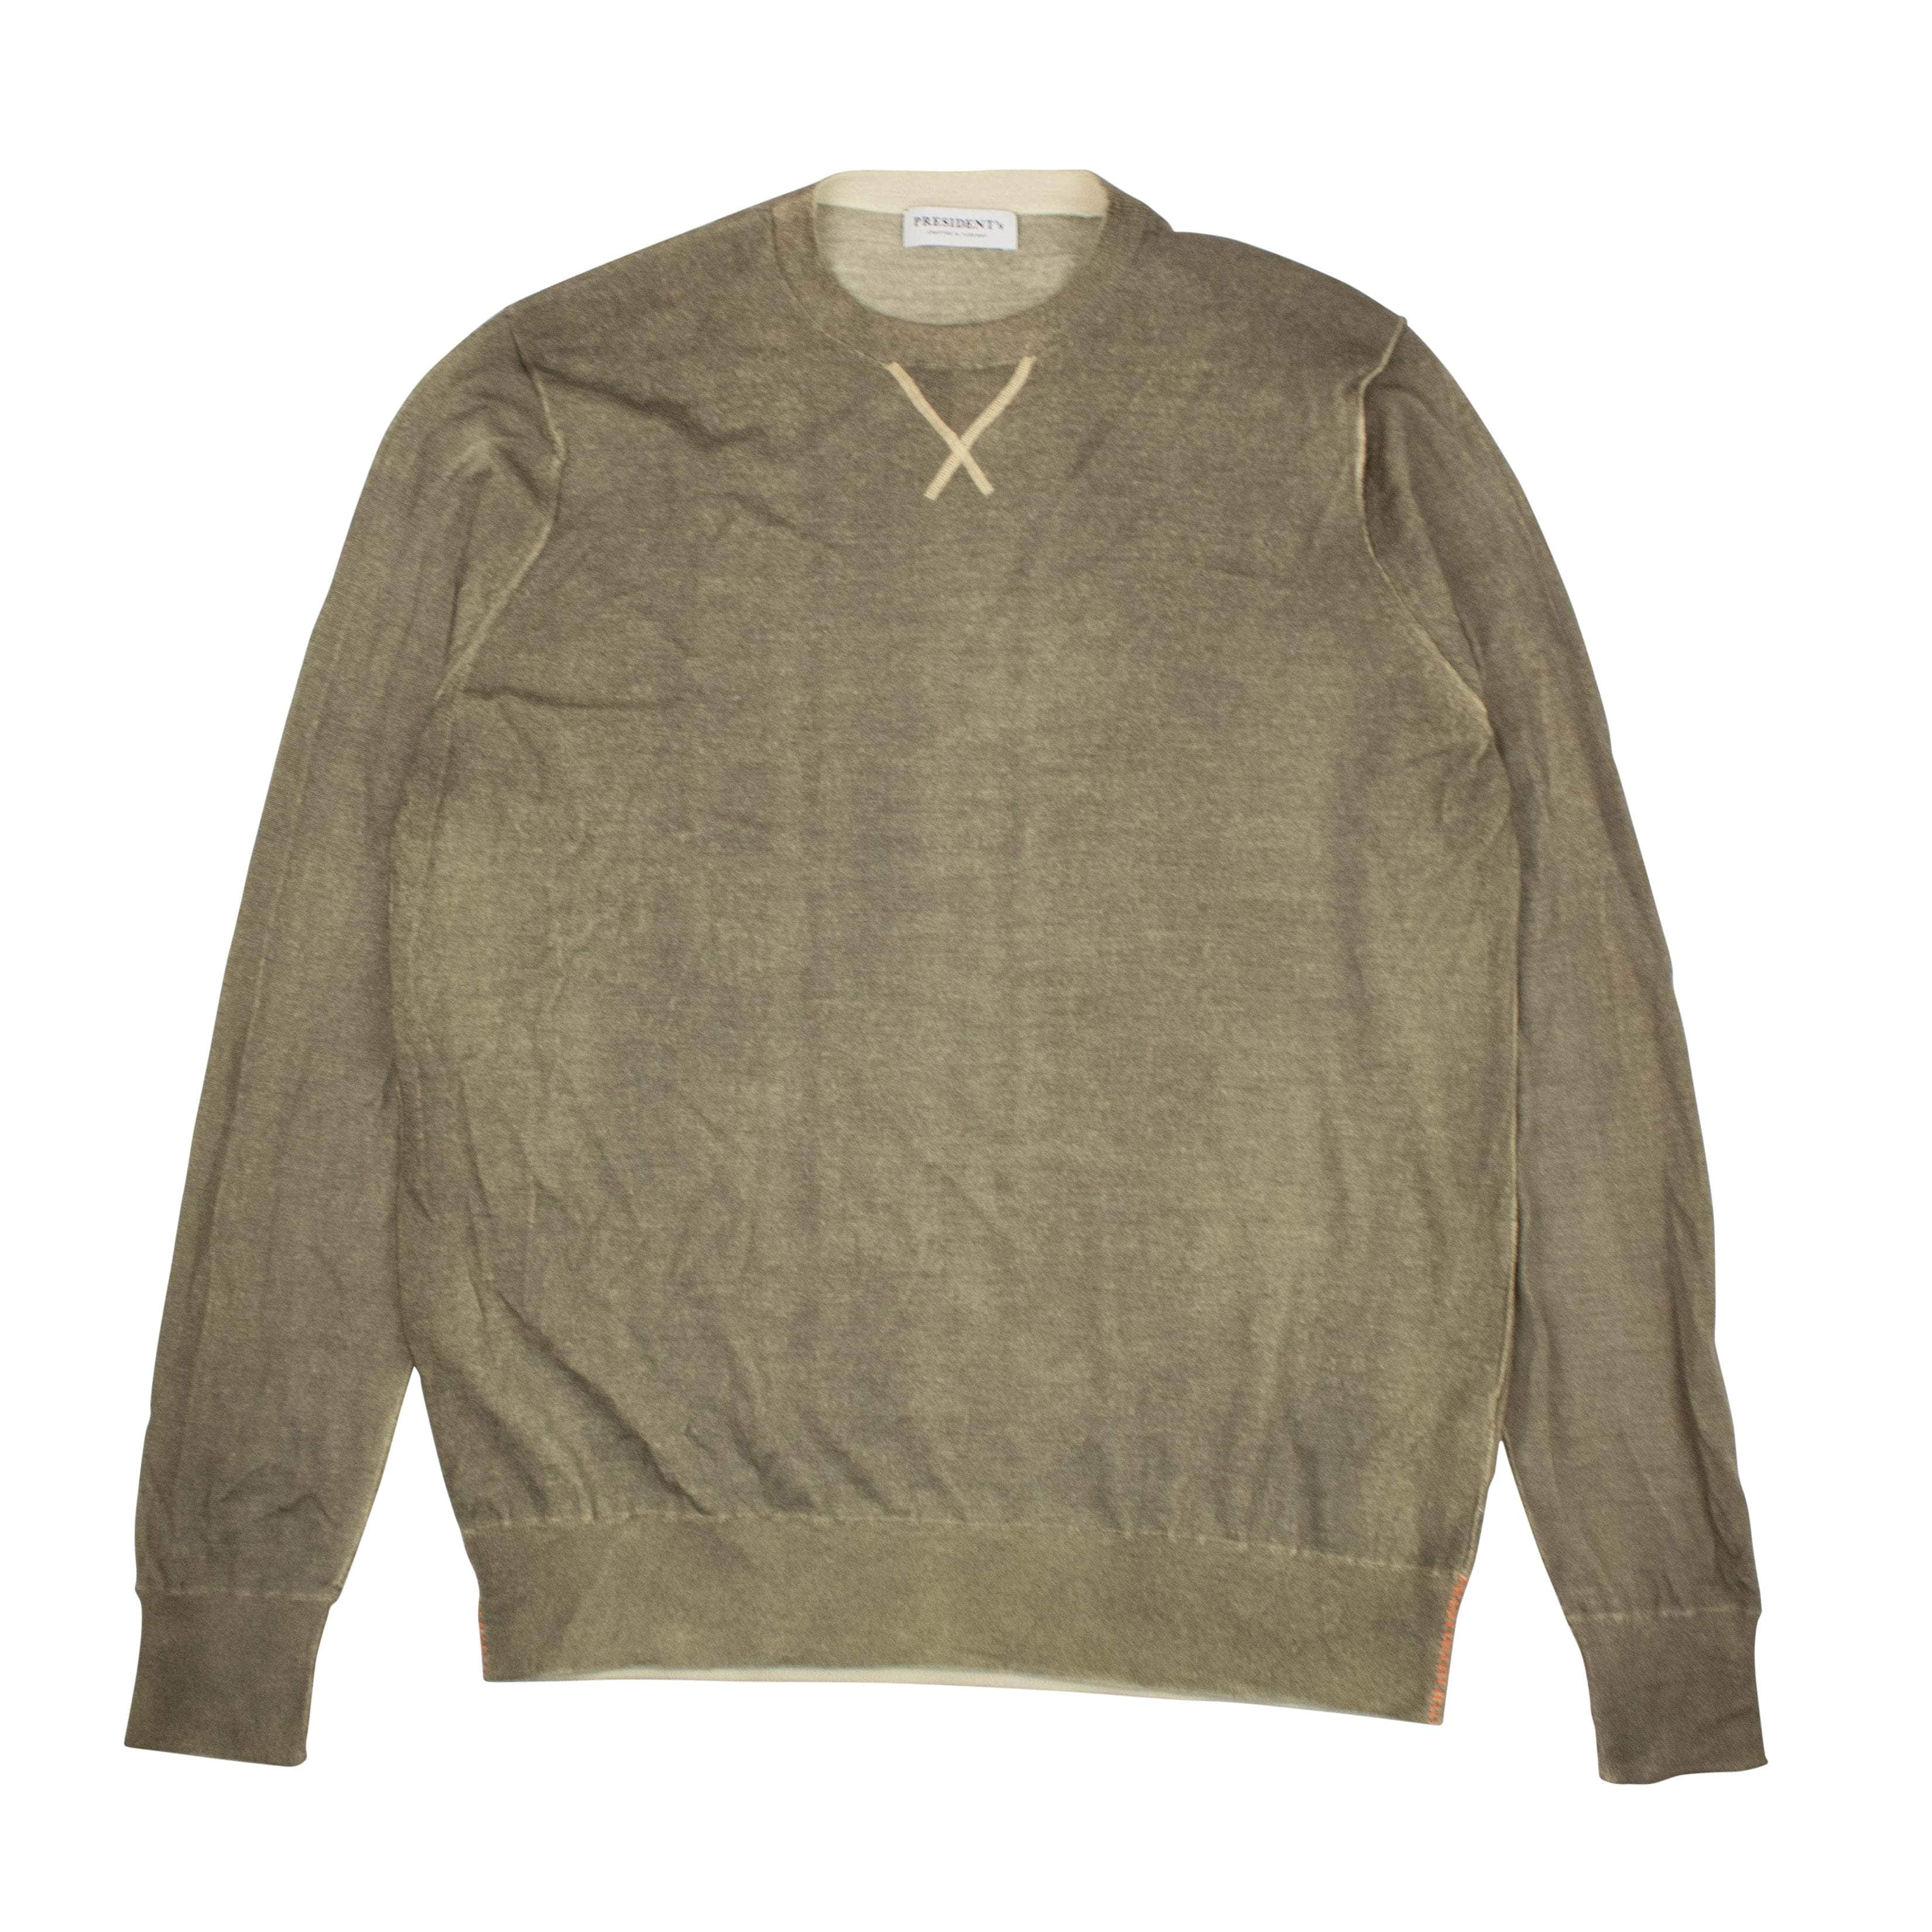 President's channelenable-all, chicmi, couponcollection, gender-mens, main-clothing, mens-cashmere-sweaters, mens-shoes, presidents, size-l, size-xl, size-xxl, under-250 Olive G.16 Wool Cashmere Hand Print Sweater